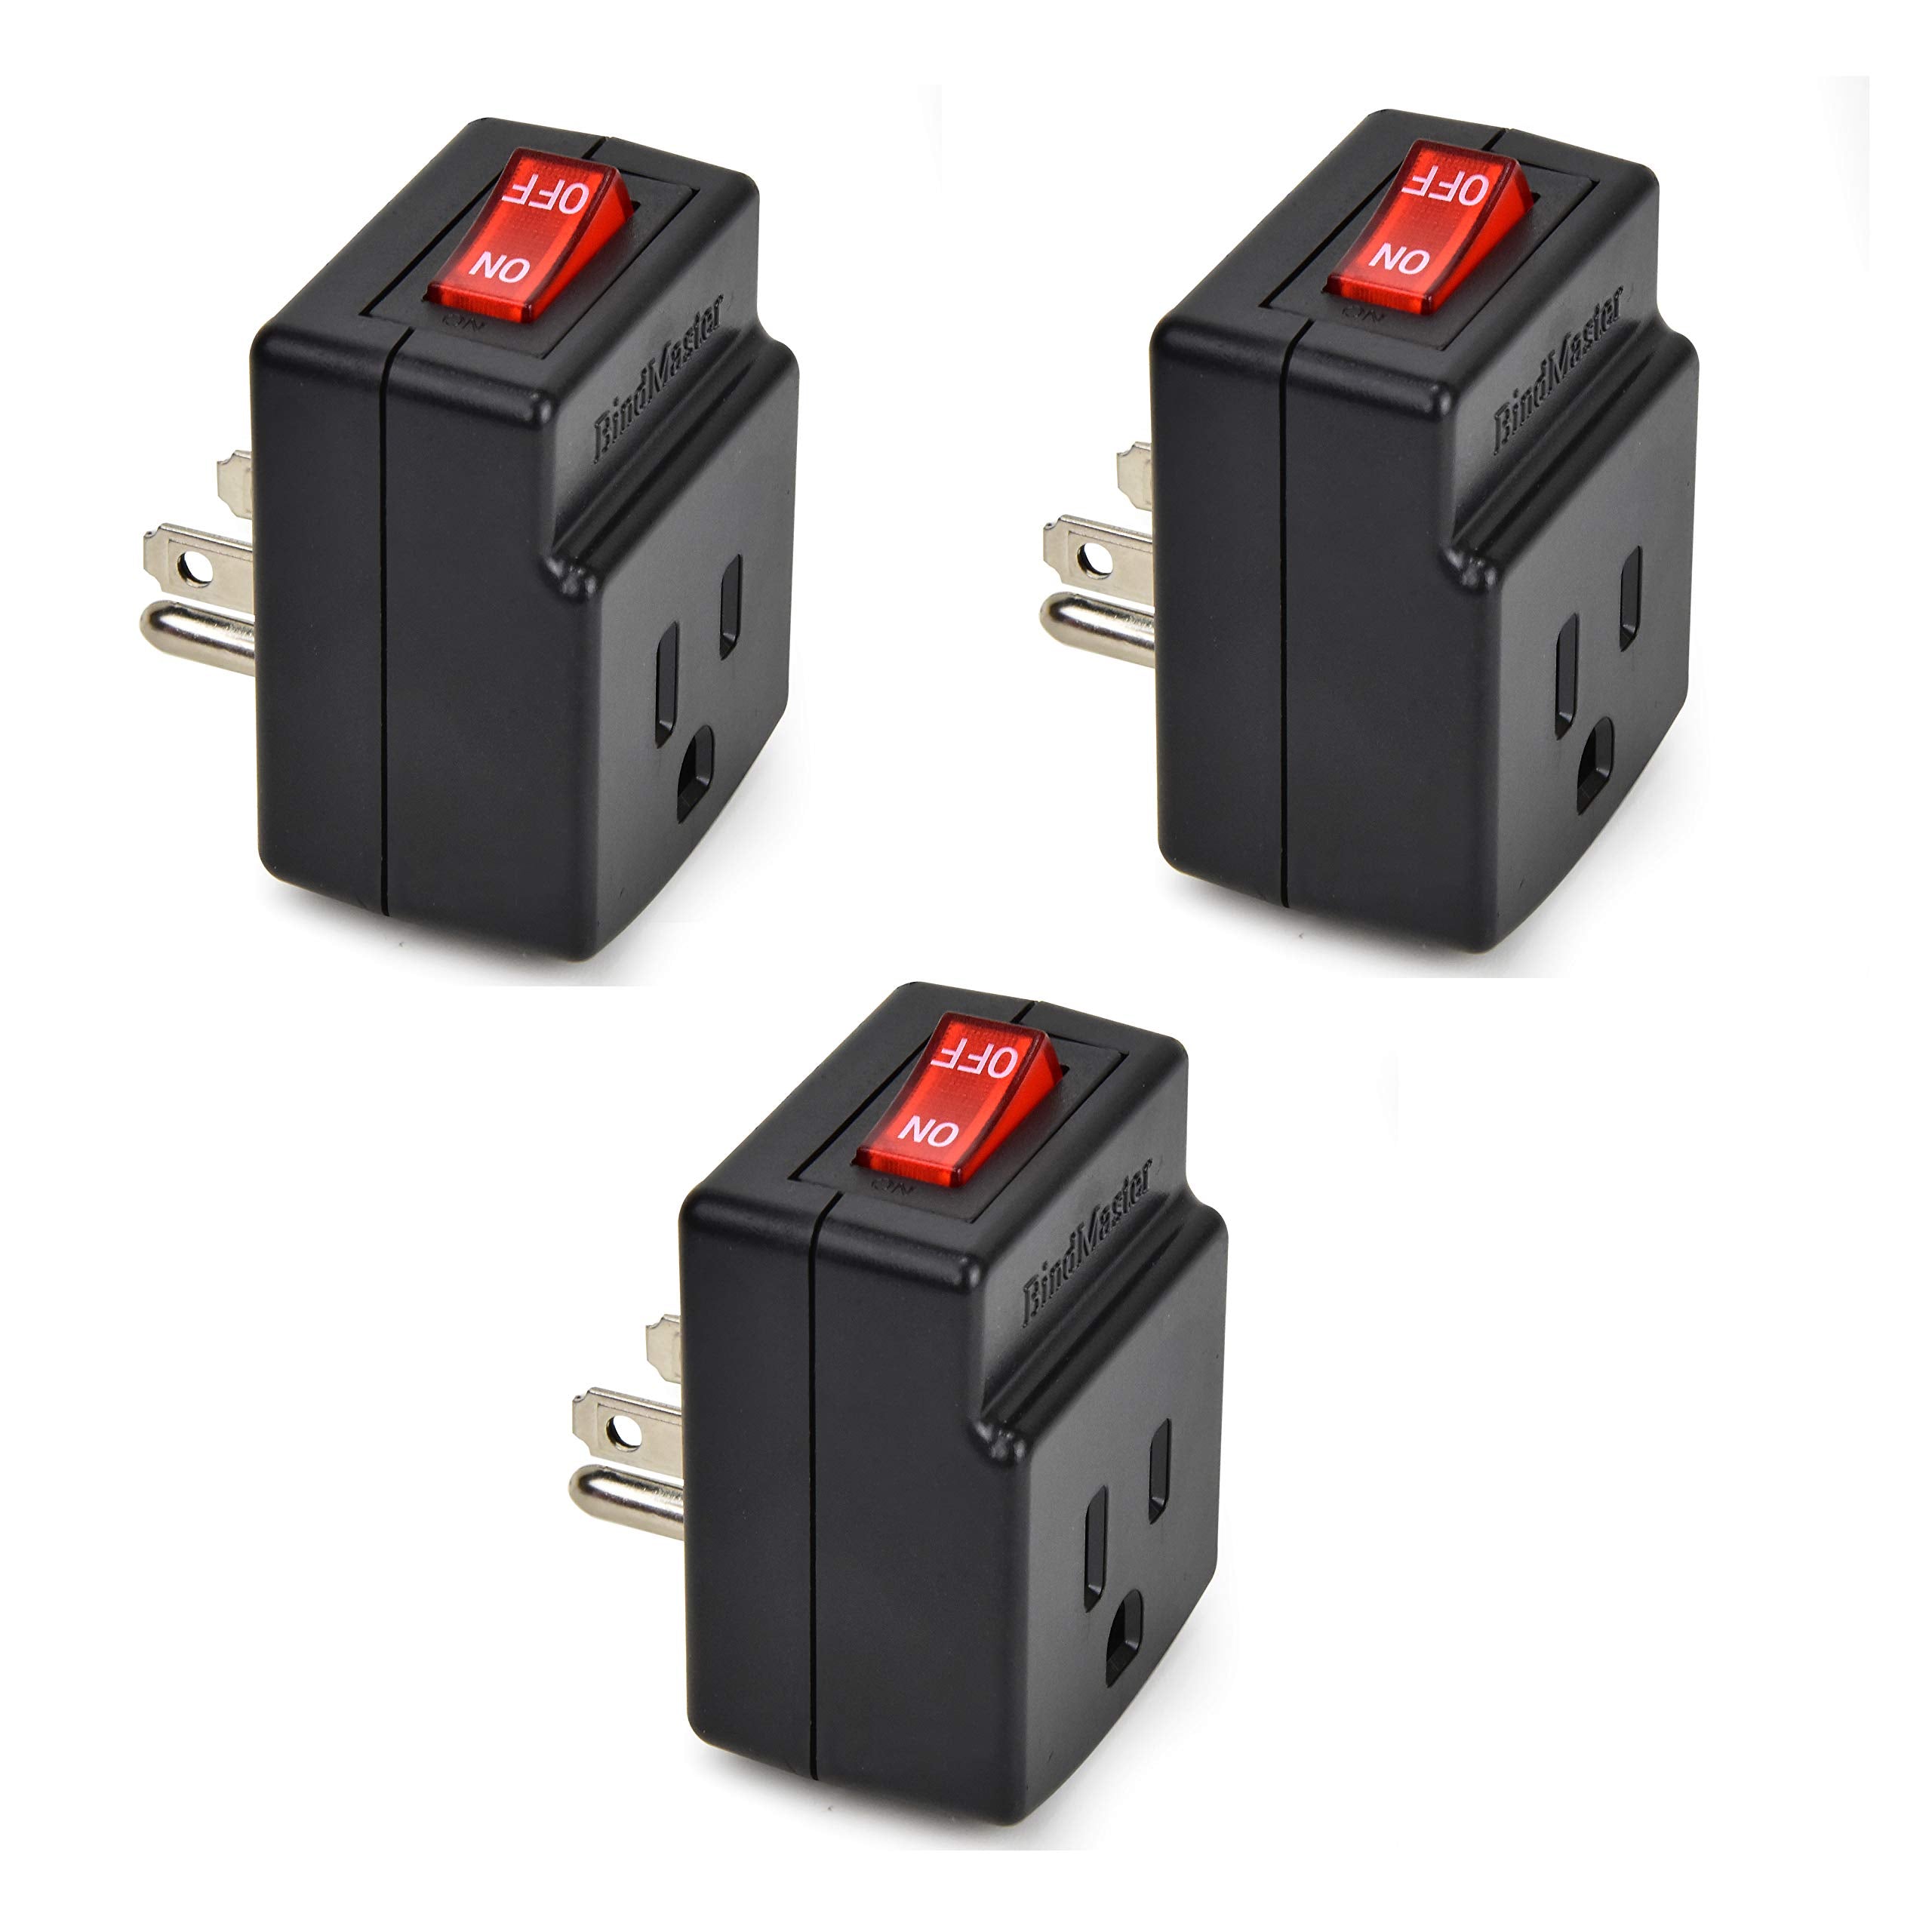 BindmMaster 3 Prong Grounded Single Port Power Adapter with Red Light Indicator On/Off Switch to be Energy Saving, Black (3 Pack)�  - Like New